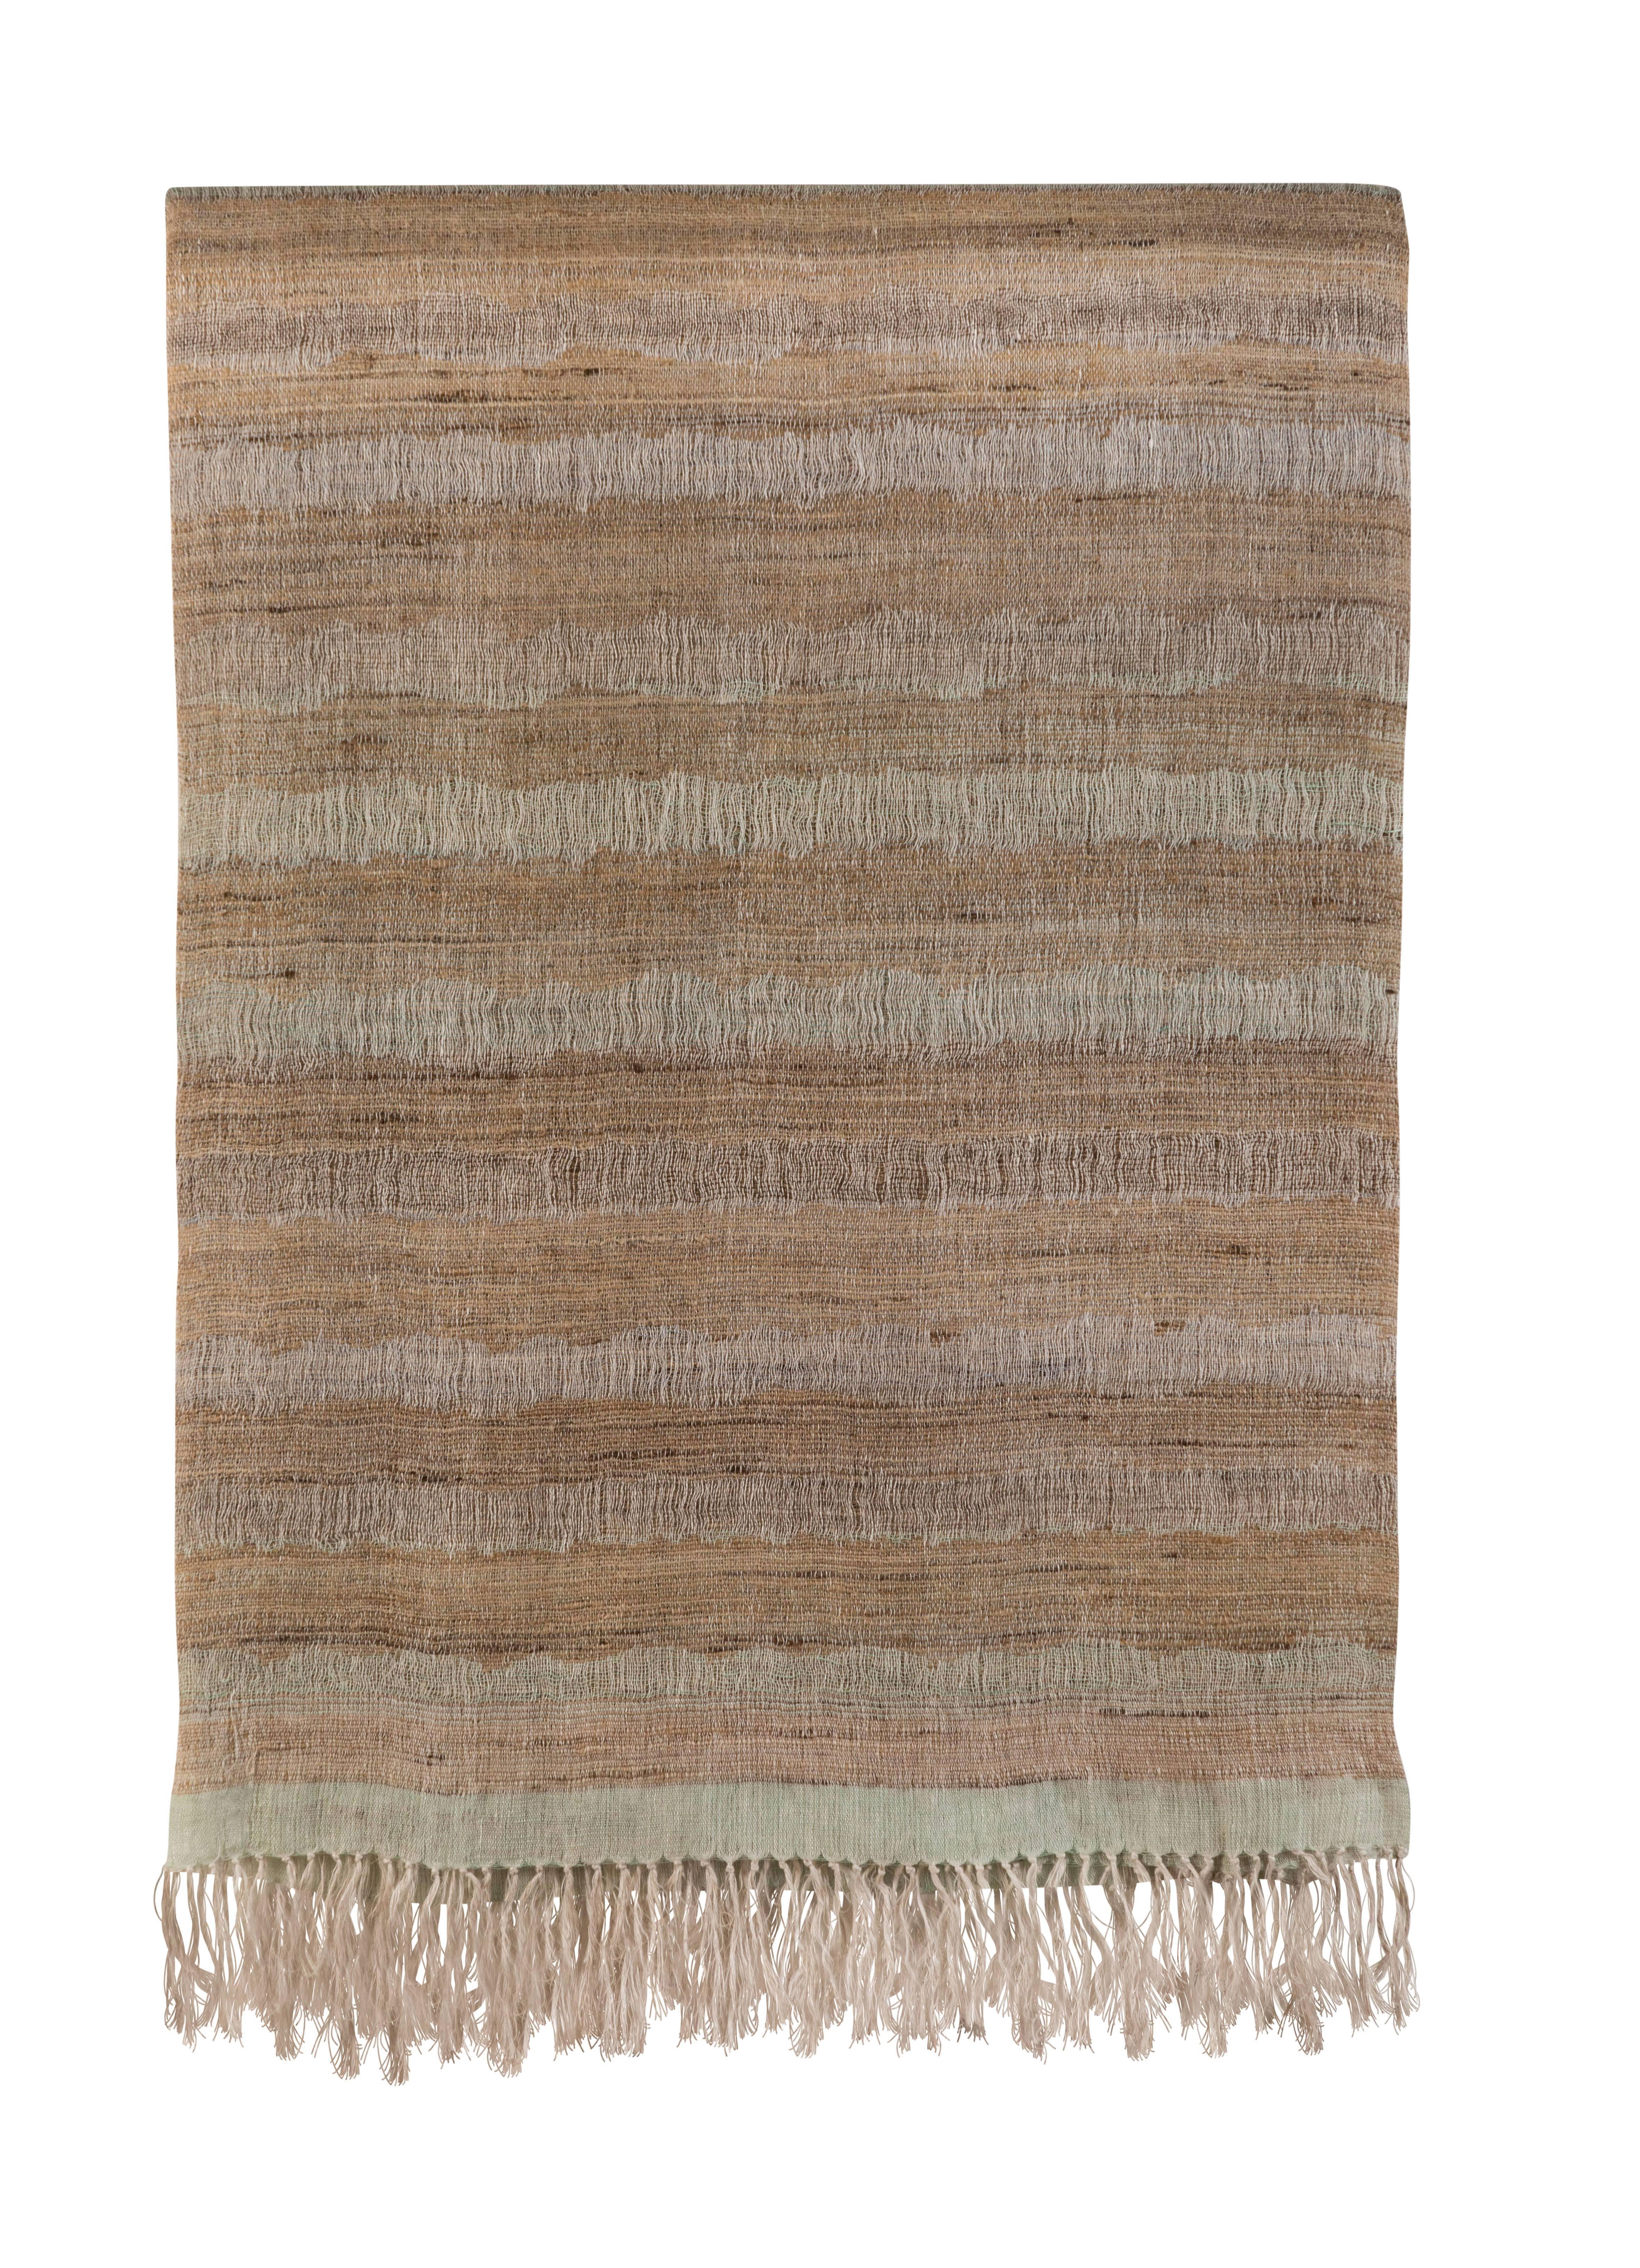 Wool Indian Handwoven Bedcover For Sale